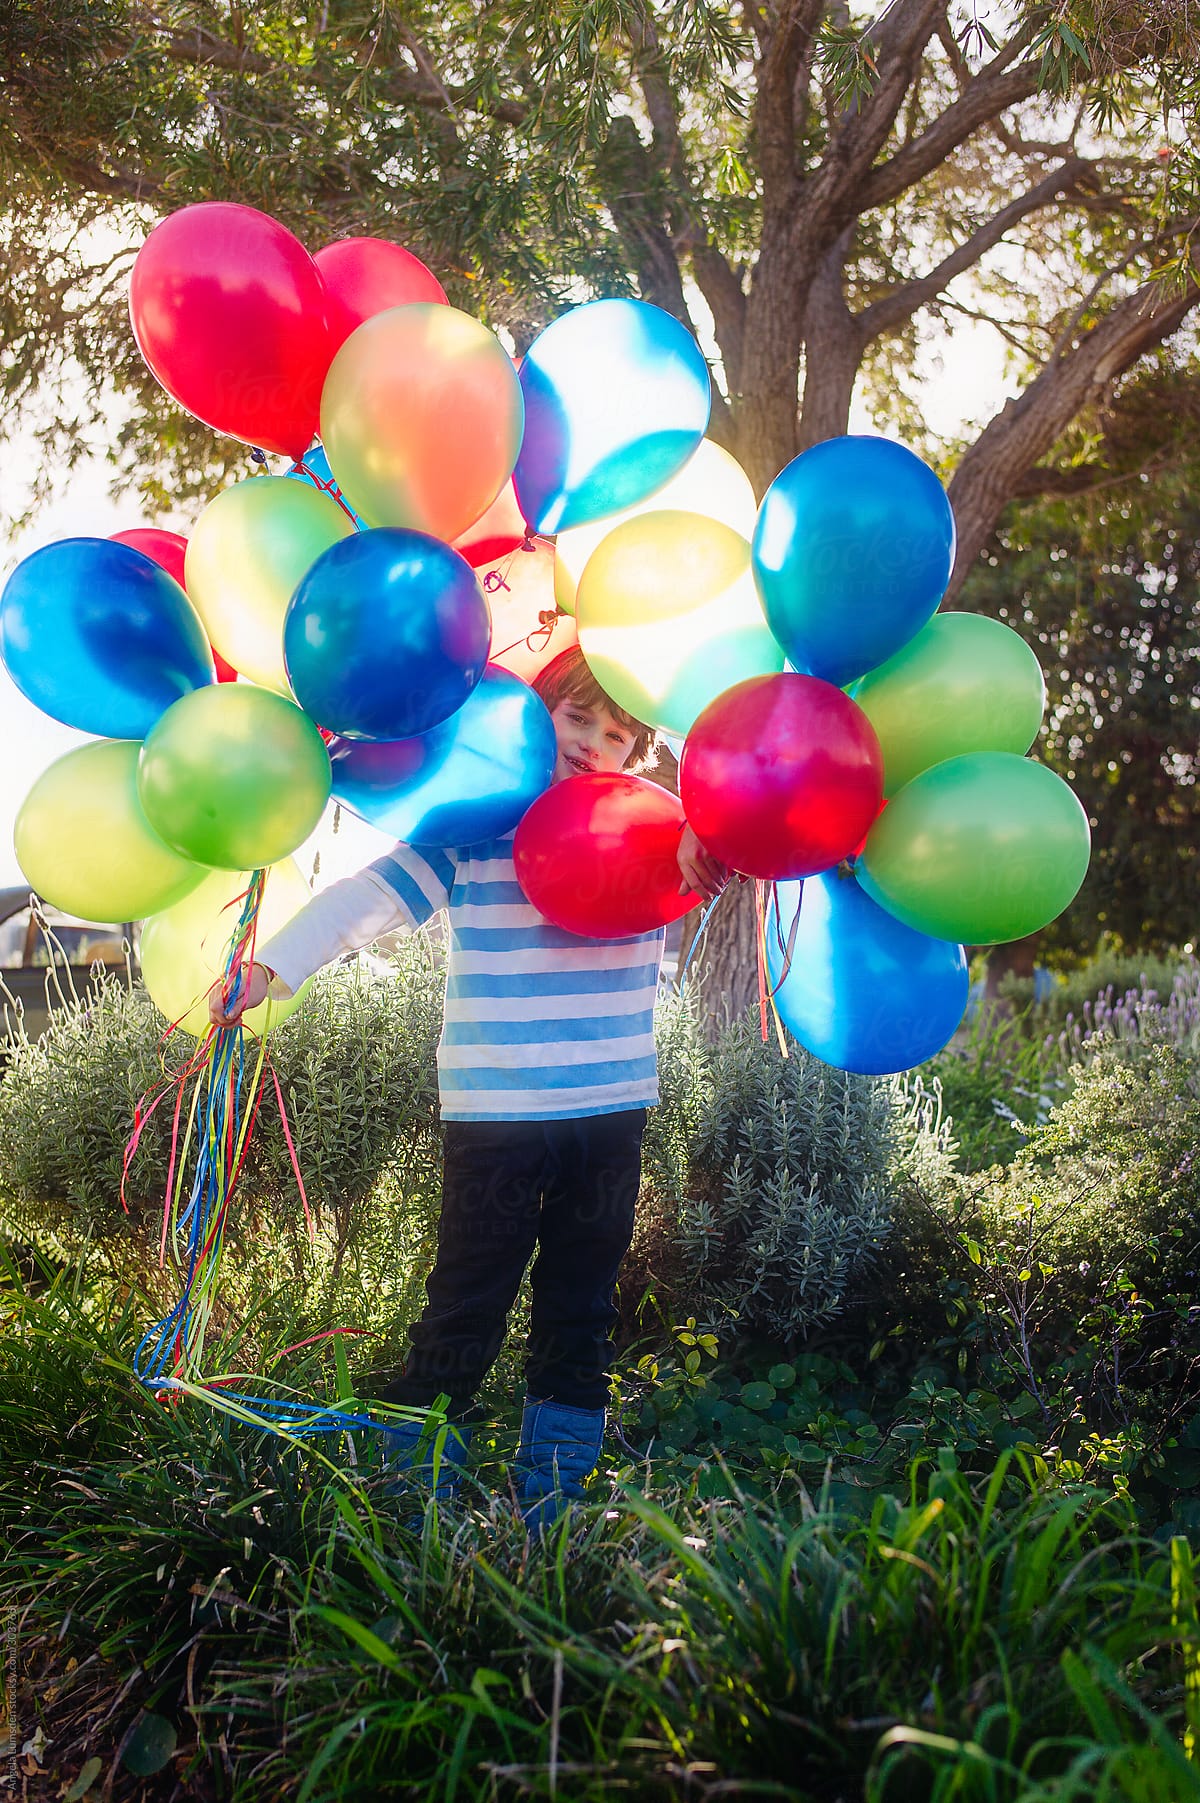 Boy with a large bunch of brightly coloured balloons